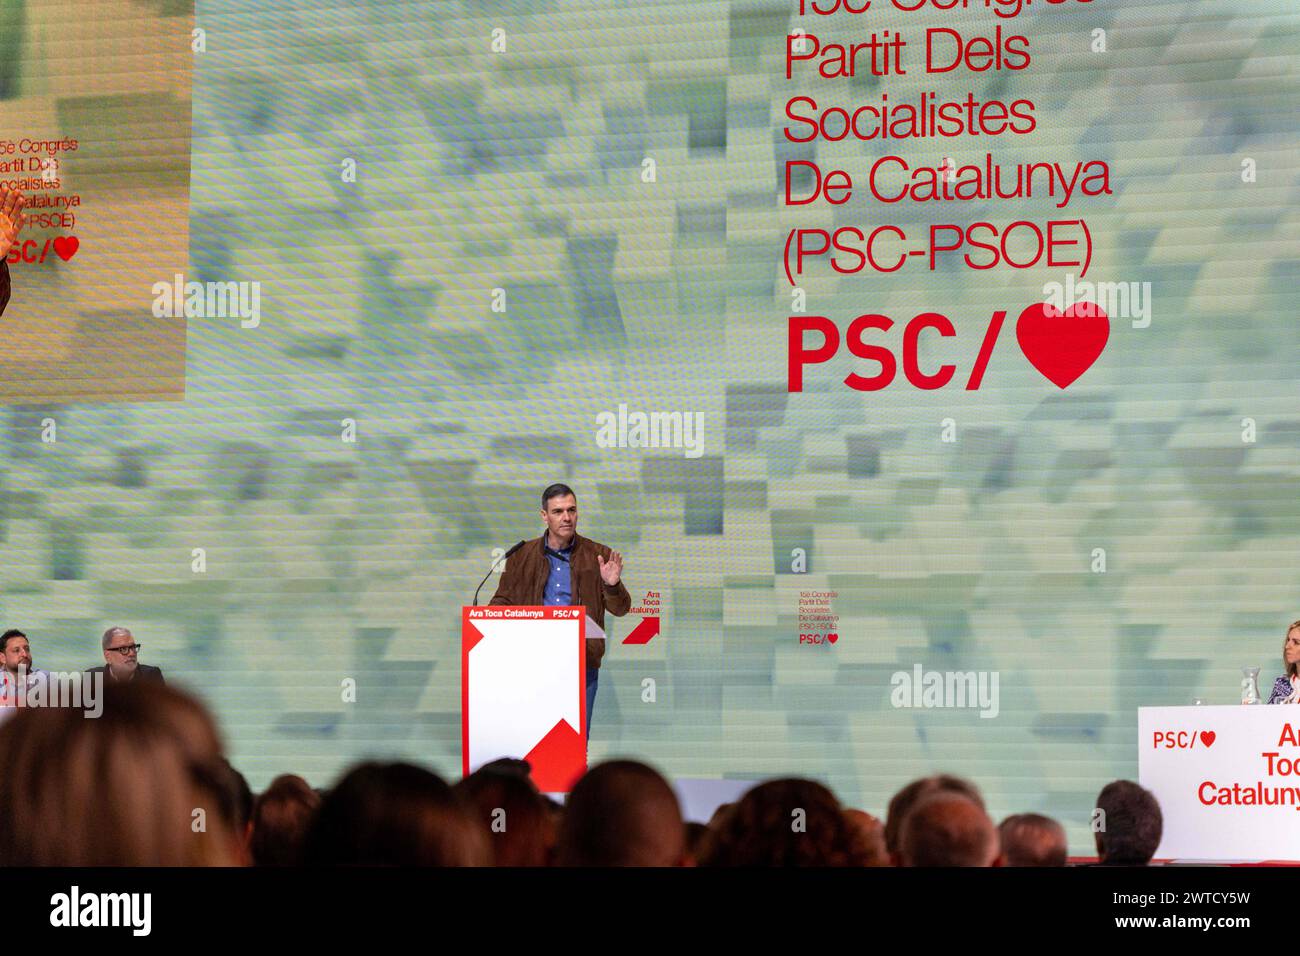 The 15th congress of the Socialist Party of Catalonia (PSC) concludes, with the presence of the Spanish Prime Minister and Secretary-General of the Spanish Socialist Workers' Party (PSOE), Pedro Sánchez, in an electoral atmosphere in Catalonia due to the call for autonomous elections on May 12th. Although the congress had been planned for weeks, the coincidence with the call for elections has given it an electoral tone, with the PSC feeling like the favorites to win due to the latest opinion polls published.' Termina el 15 congreso del Partit dels Socialistes de Catalunya (PSC), con la presen Stock Photo